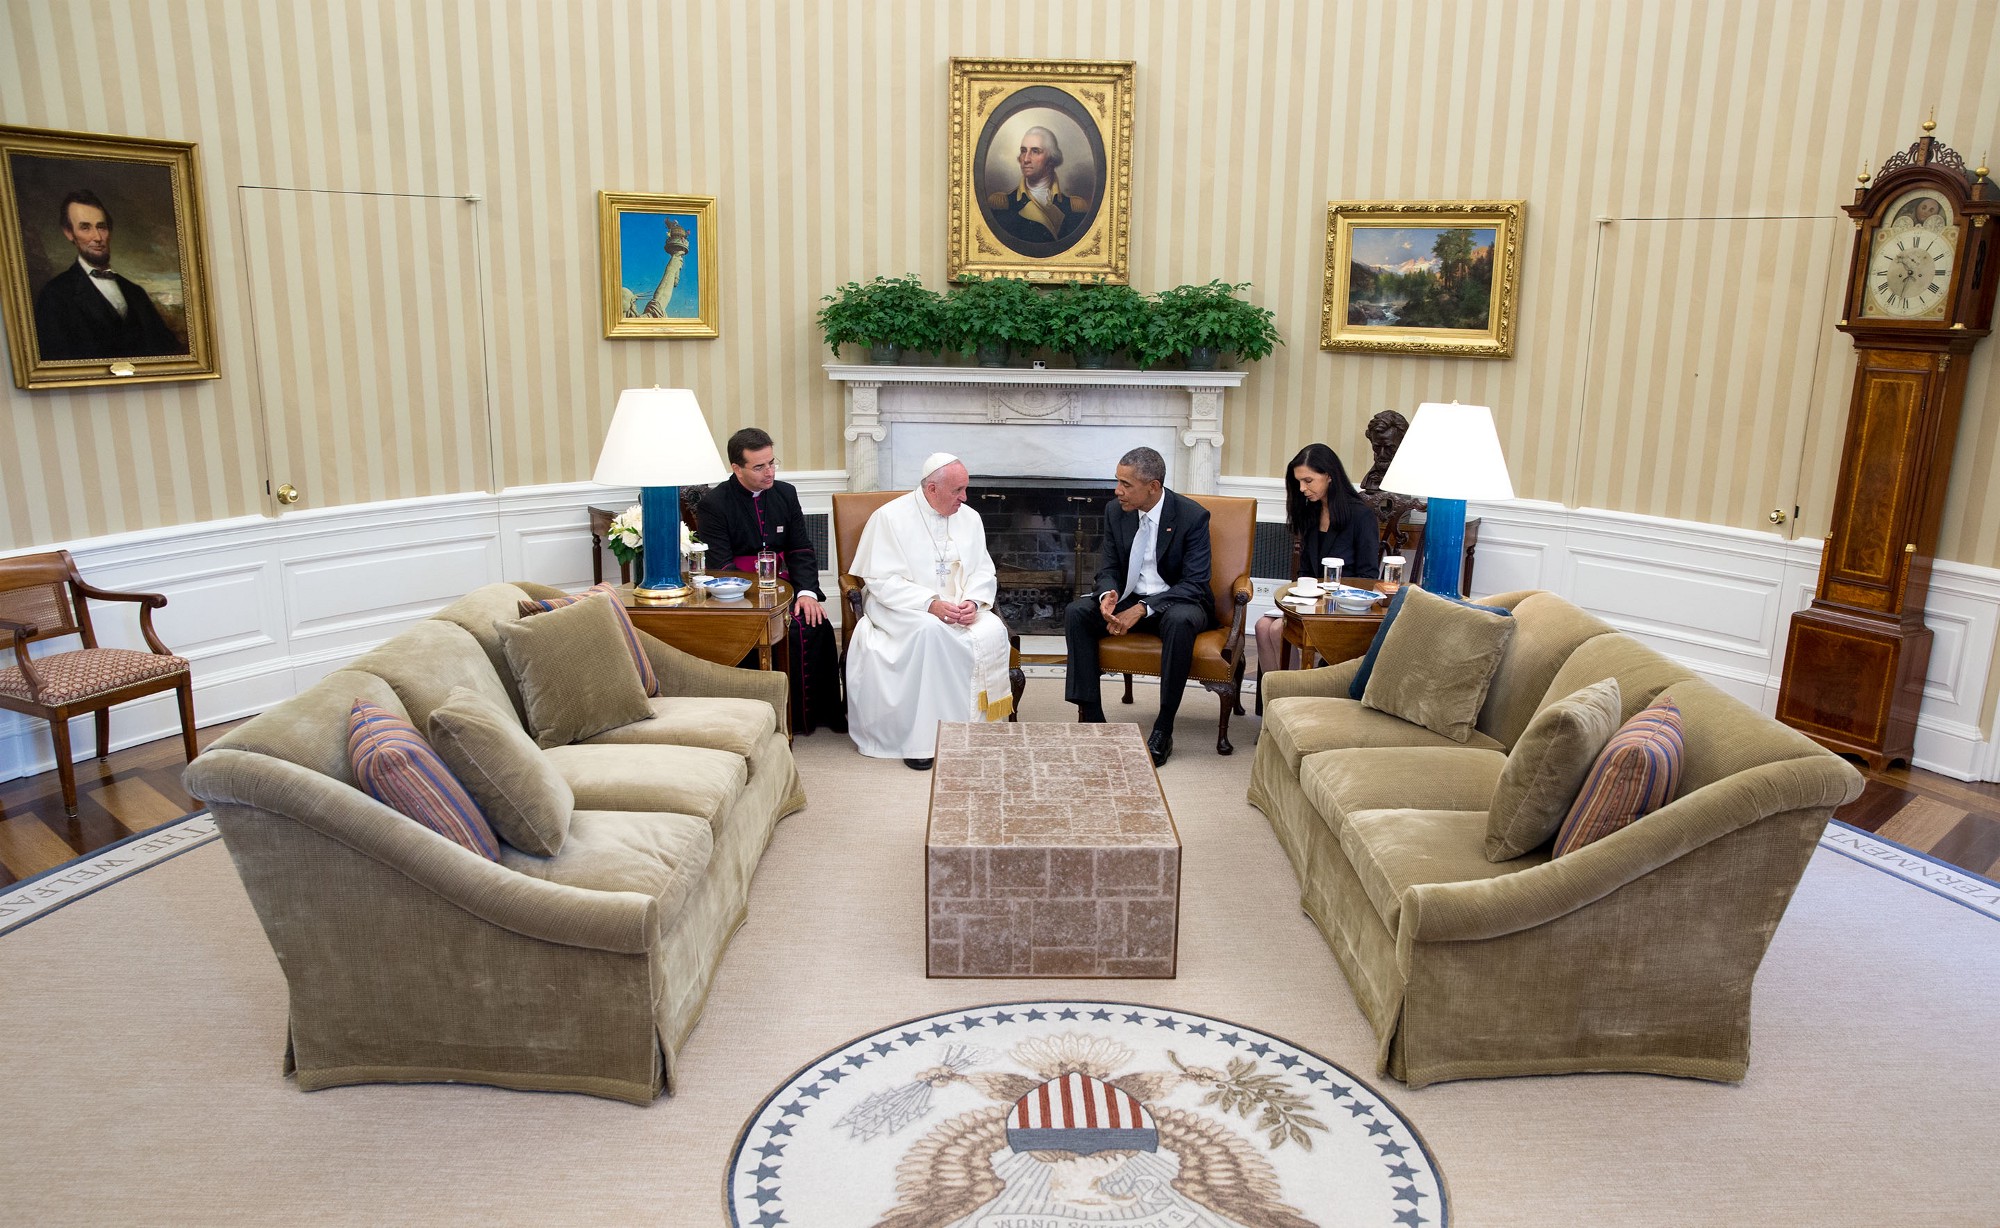 President Obama meets with the Pope. (Official White House Photo by Pete Souza)